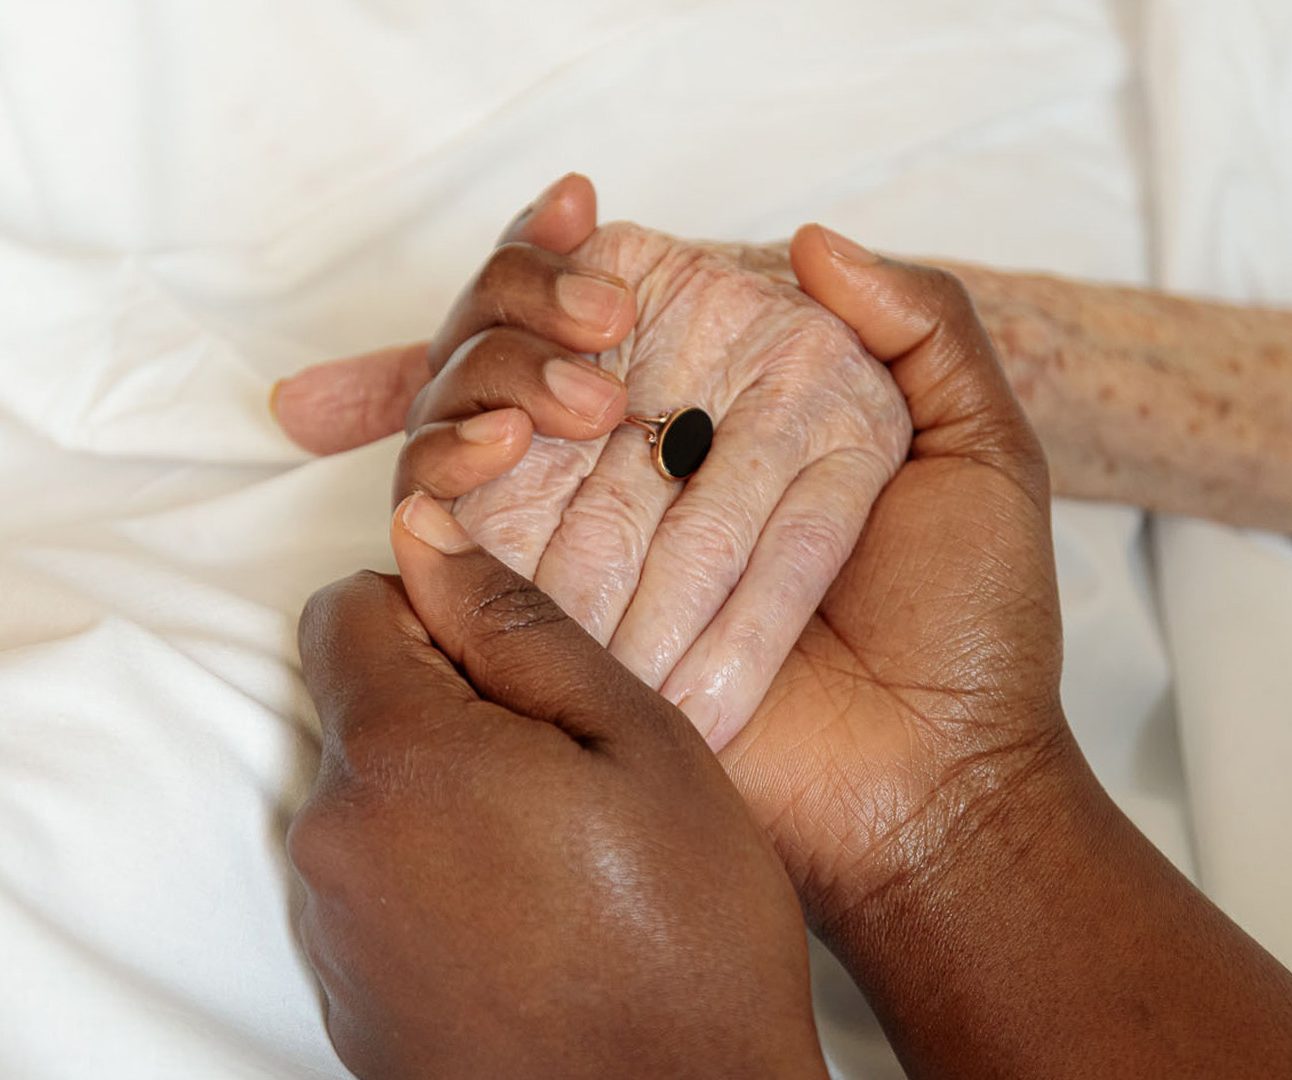 Holding hands with a patient